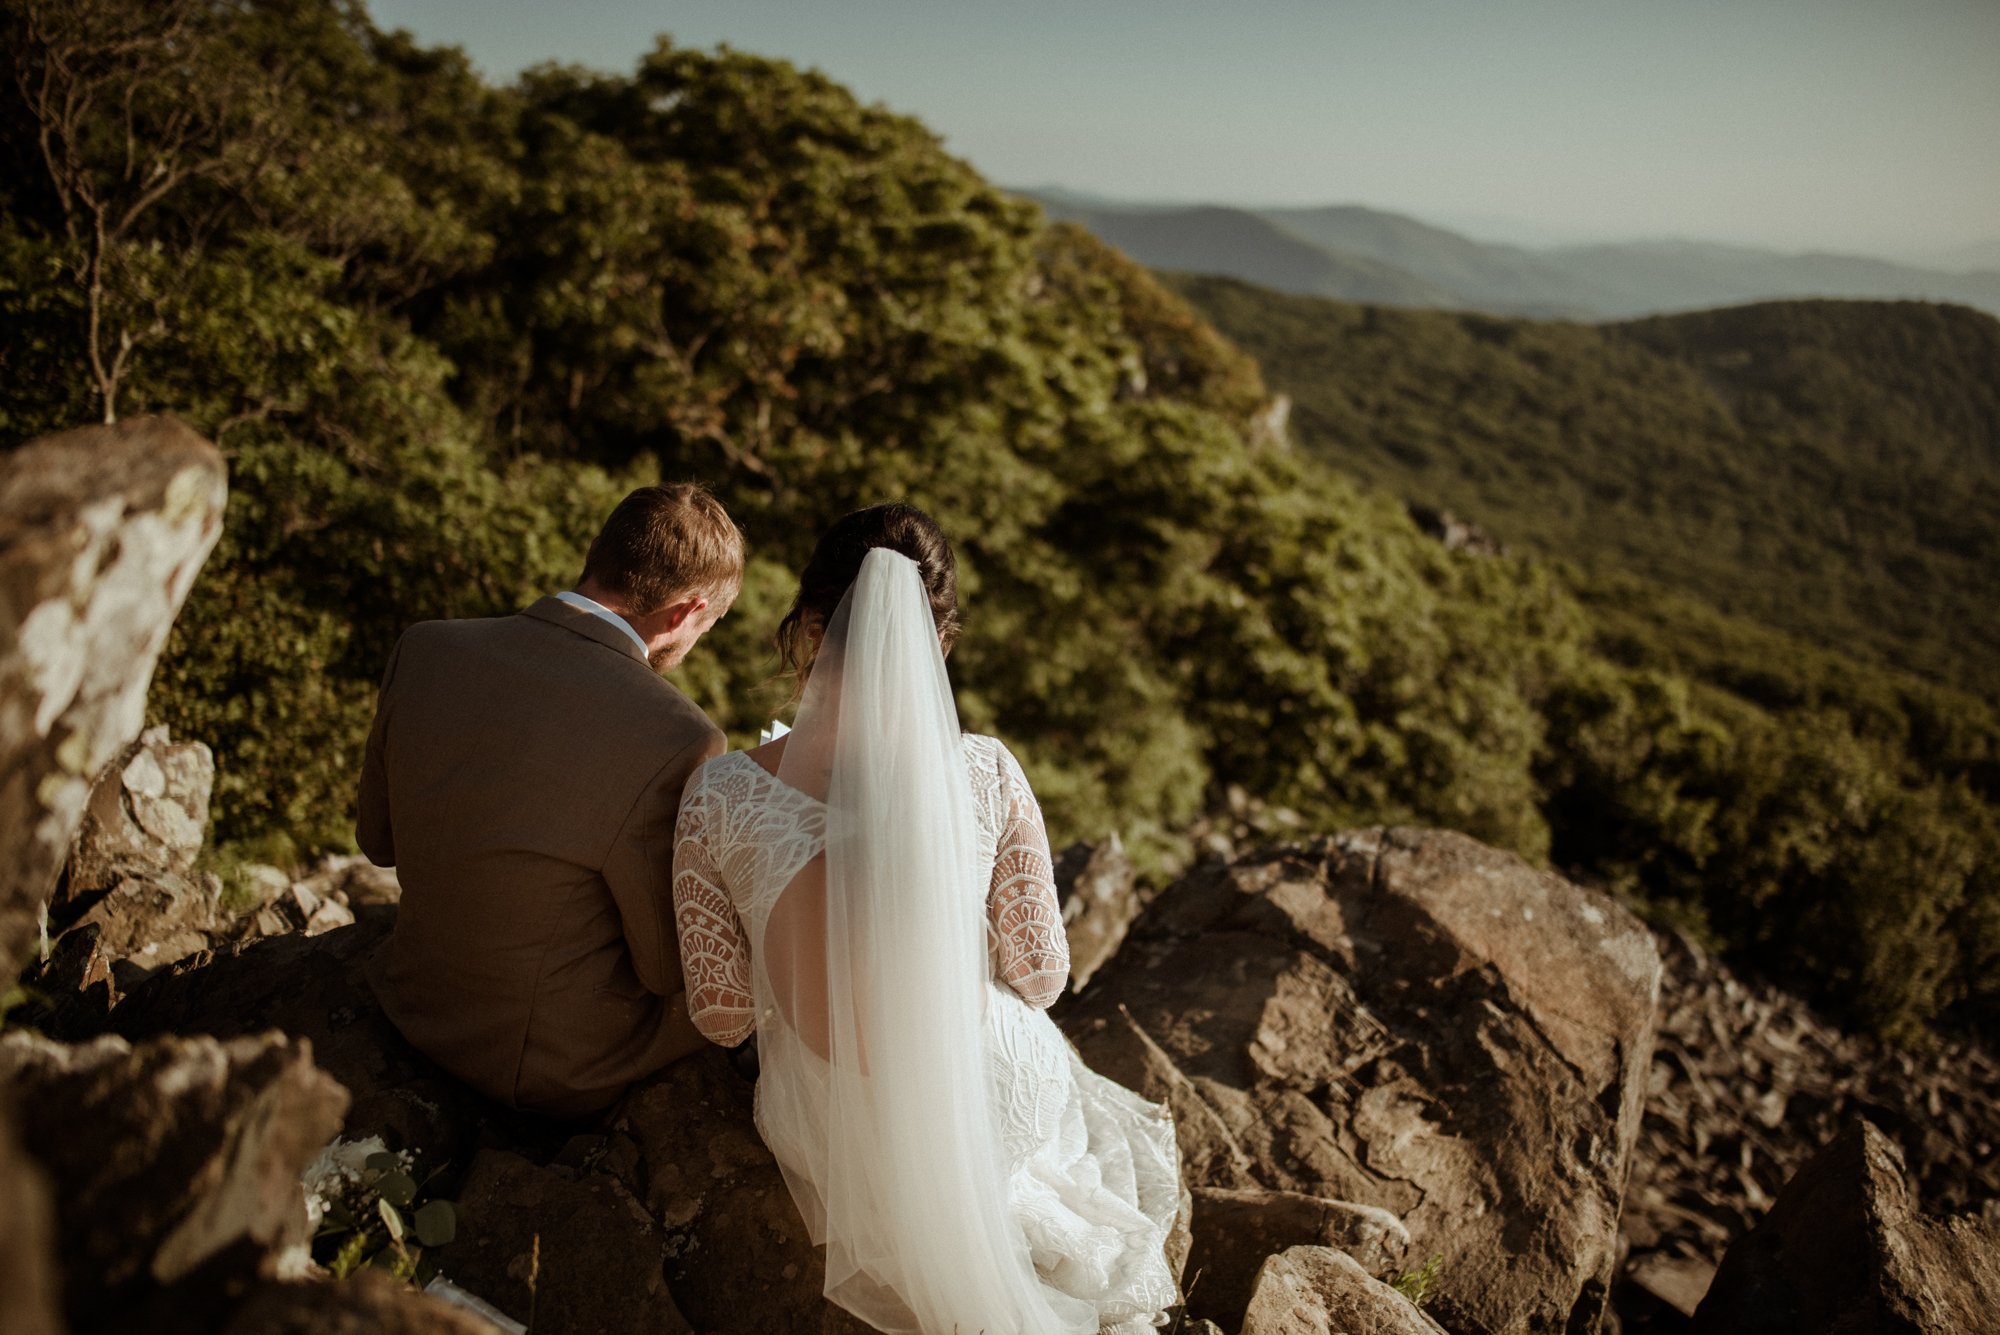 Sunset Elopement on Stony Man Summit in Shenandoah National Park - White Sails Creative Elopement Photography - July Elopement on the Blue Ridge Parkway_16.jpg